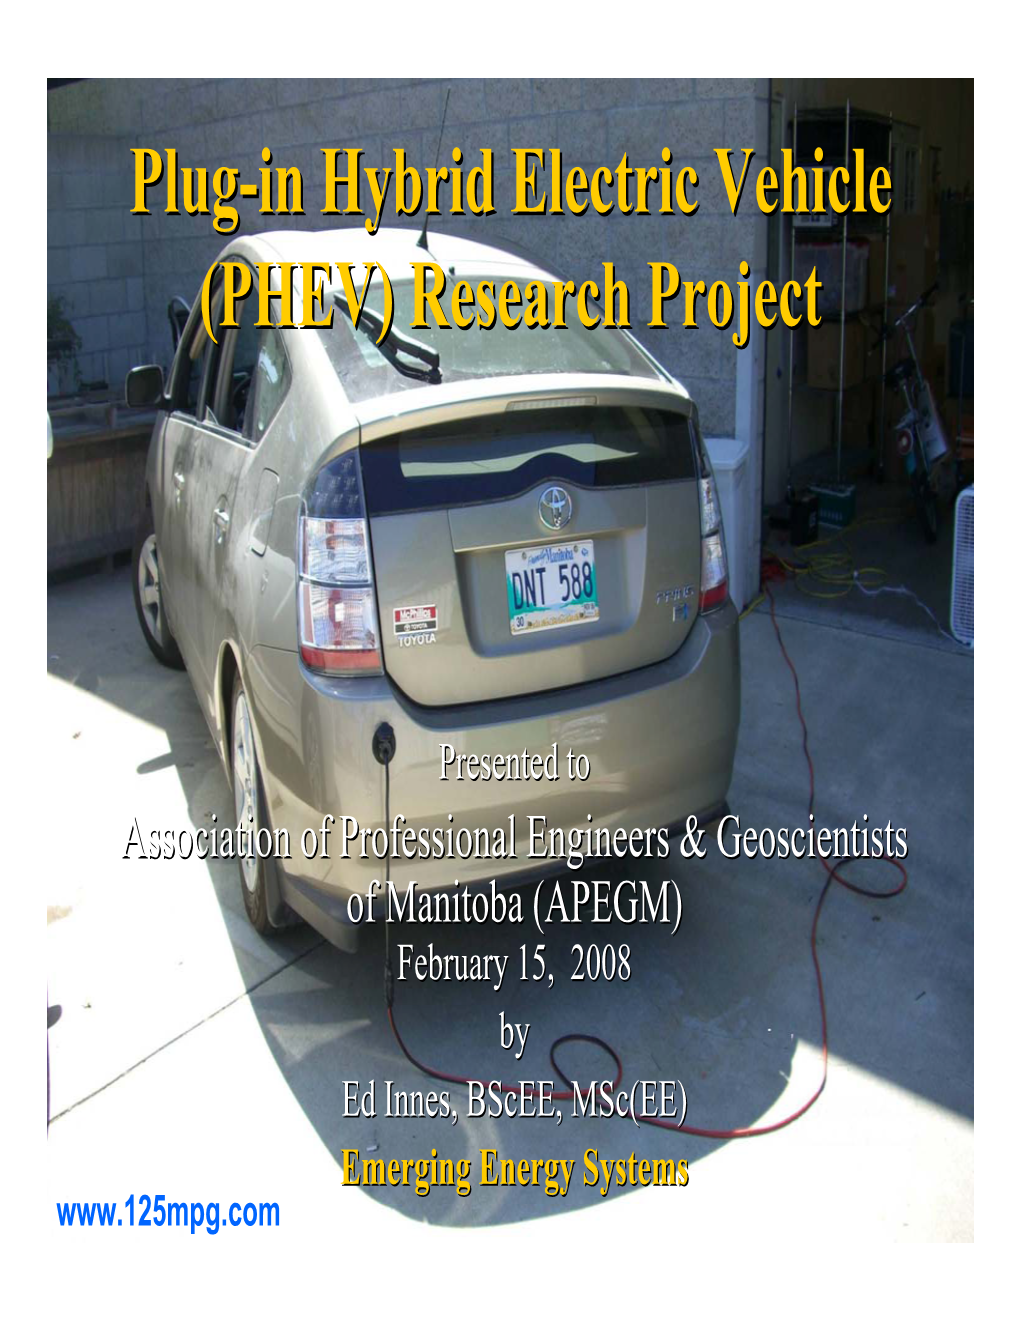 Plug-In Hybrid Electric Vehicle (PHEV) Research Project